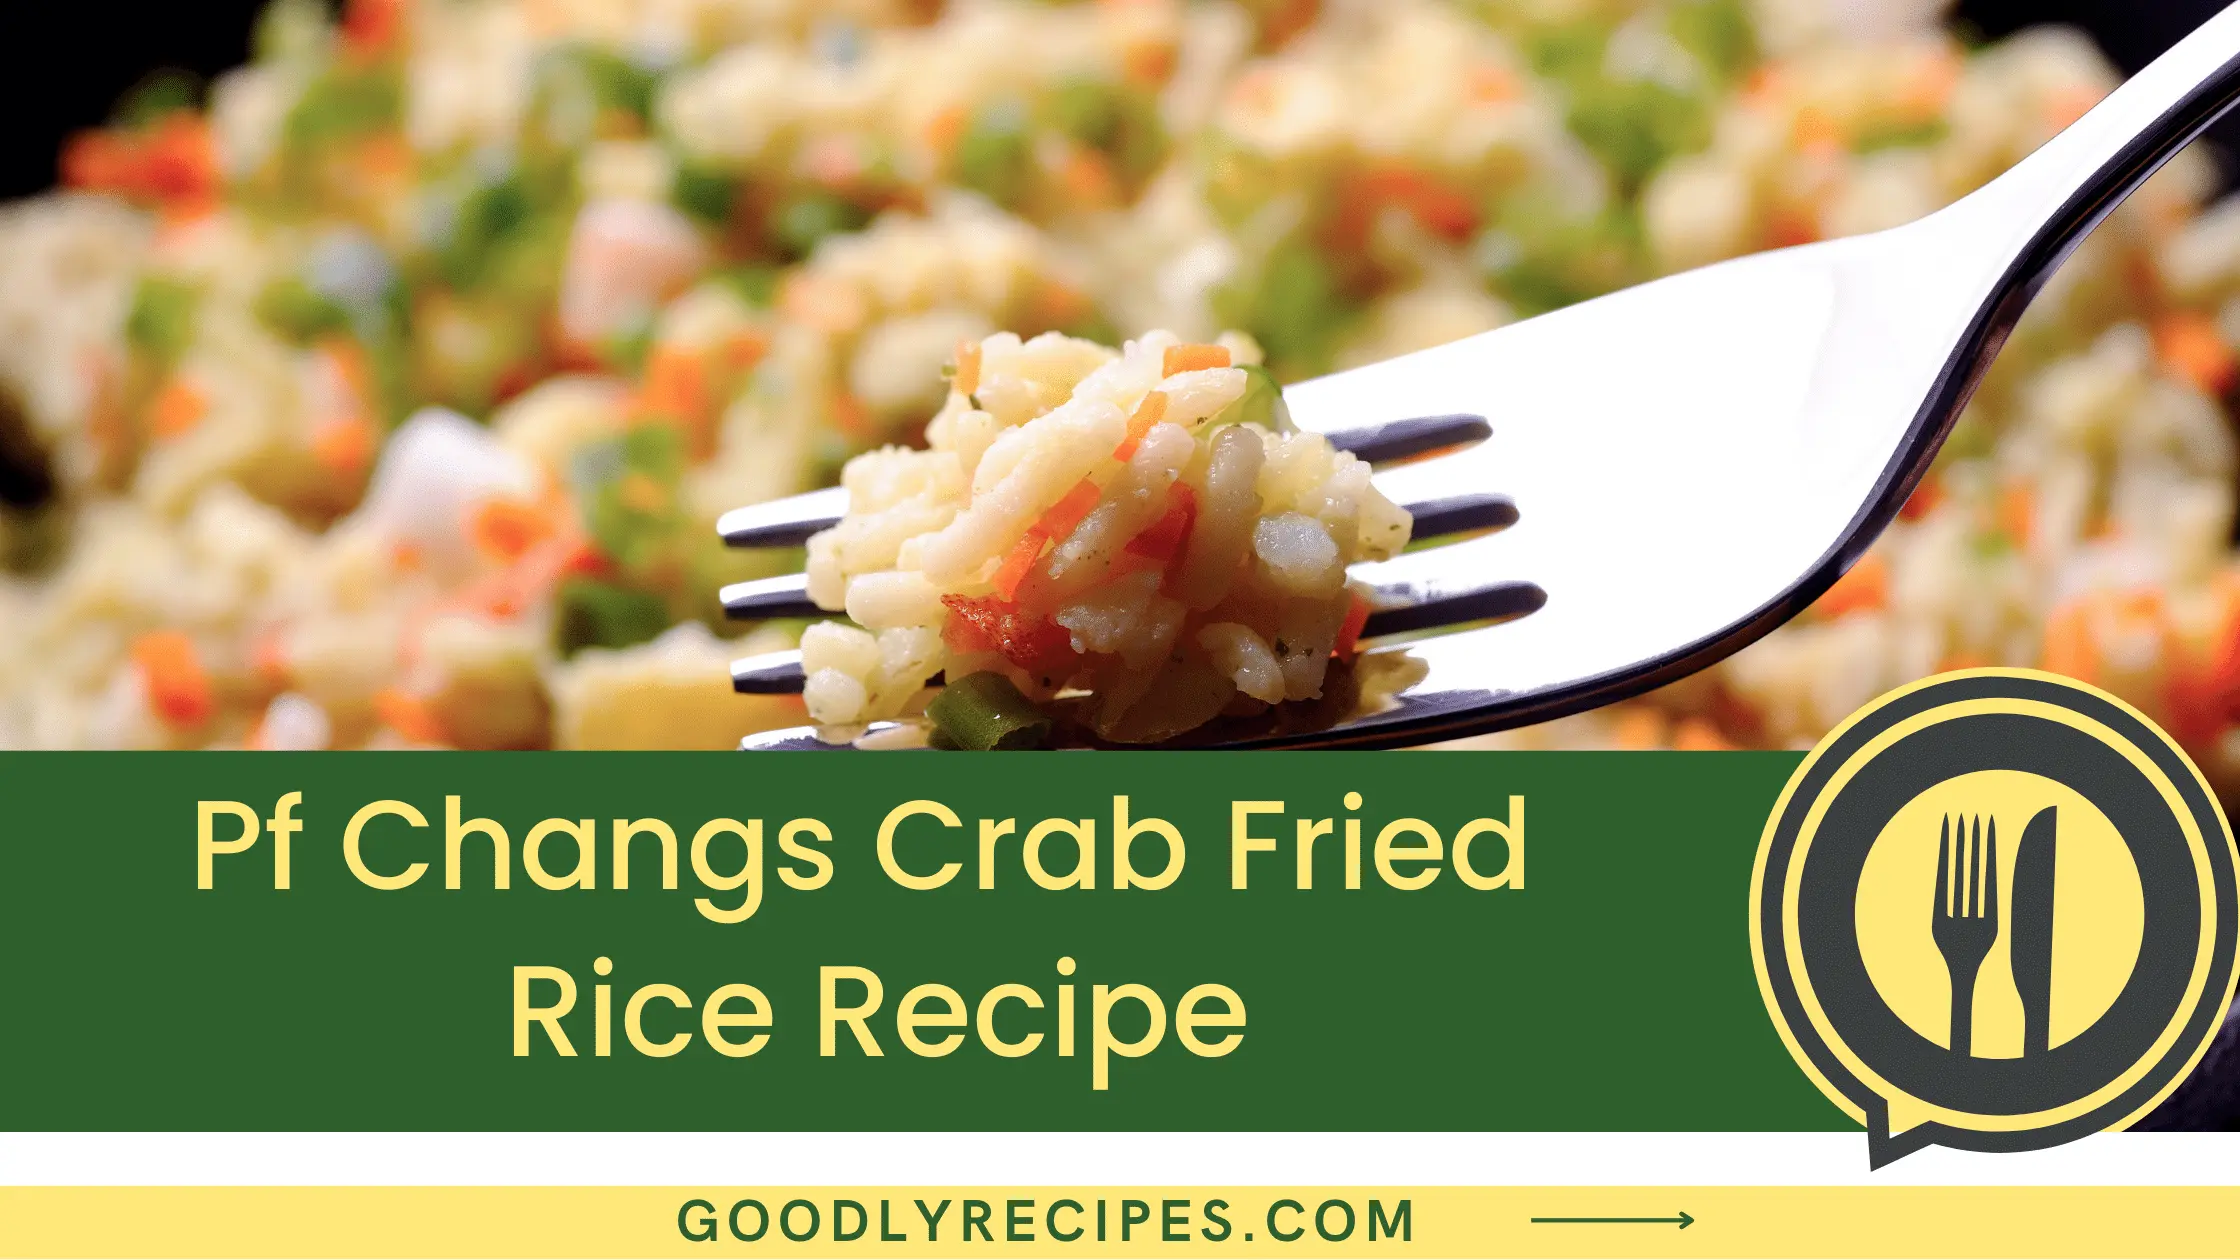 Pf Changs Crab Fried Rice Recipe - For Food Lovers